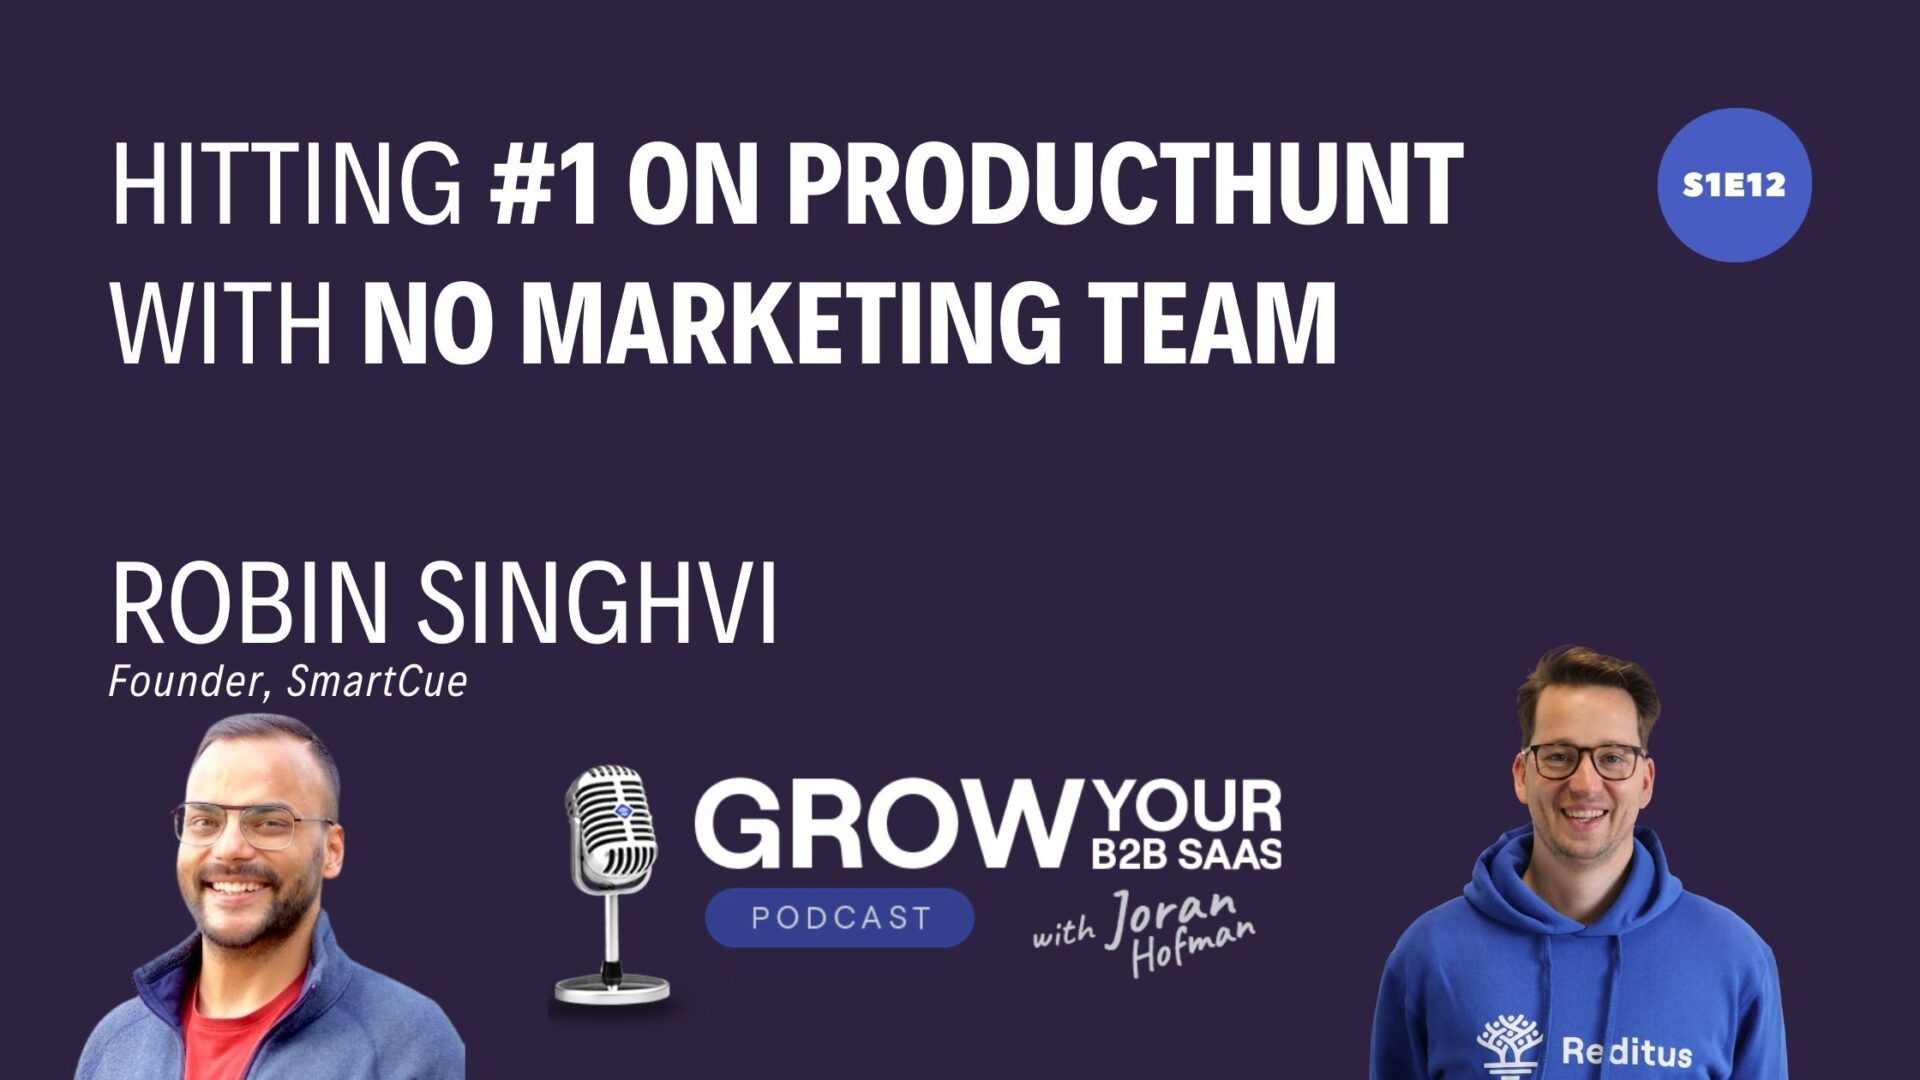 https://www.getreditus.com/podcast/s1e12-hitting-1-on-producthunt-with-no-marketing-team/